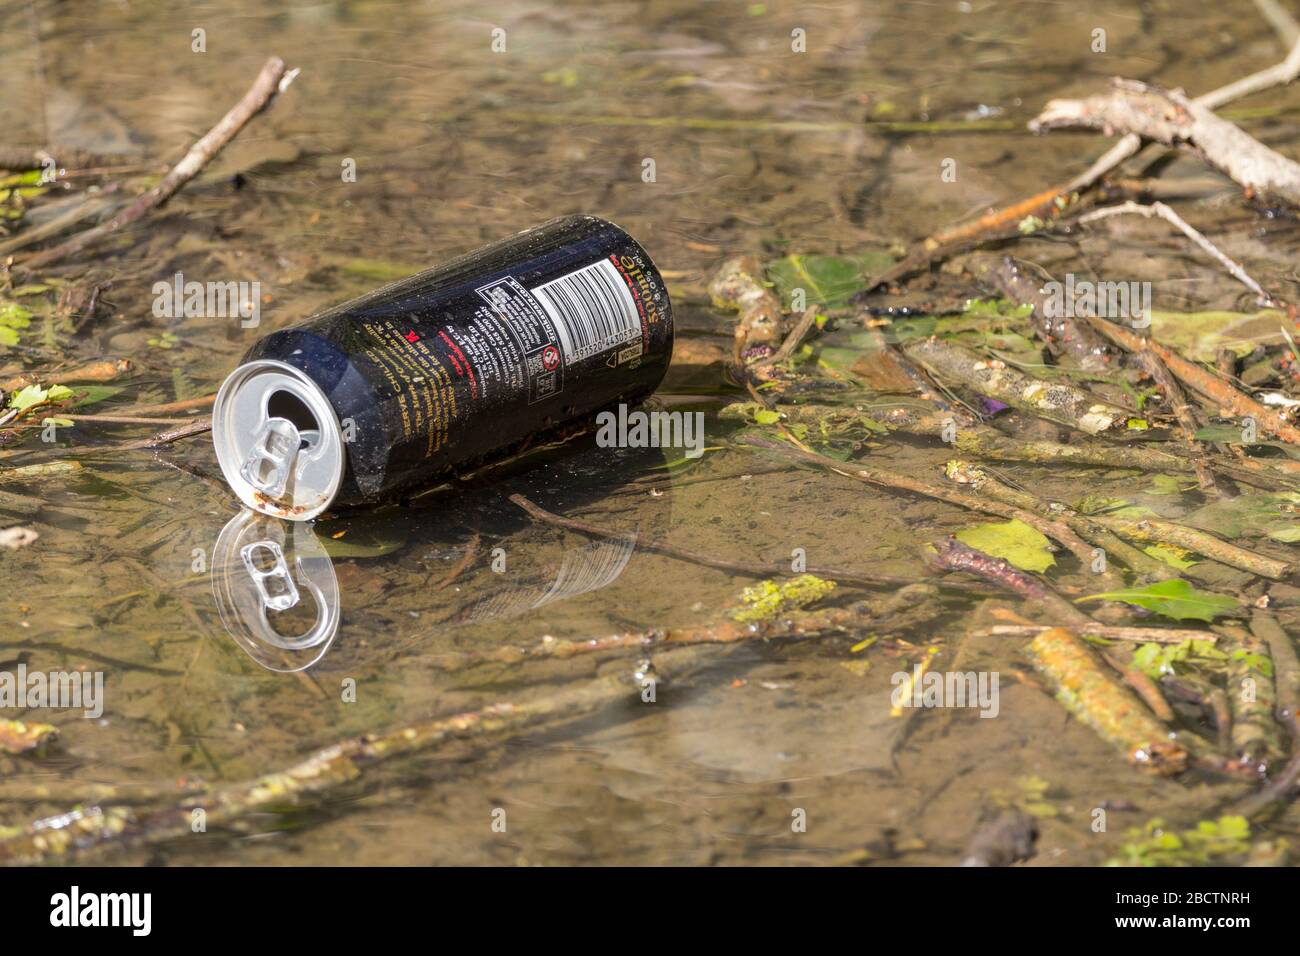 Water pollution discarded food container alumimium drinks can thrown in stream unrecycled metal product carelessley discarded by consumer Horsham UK Stock Photo